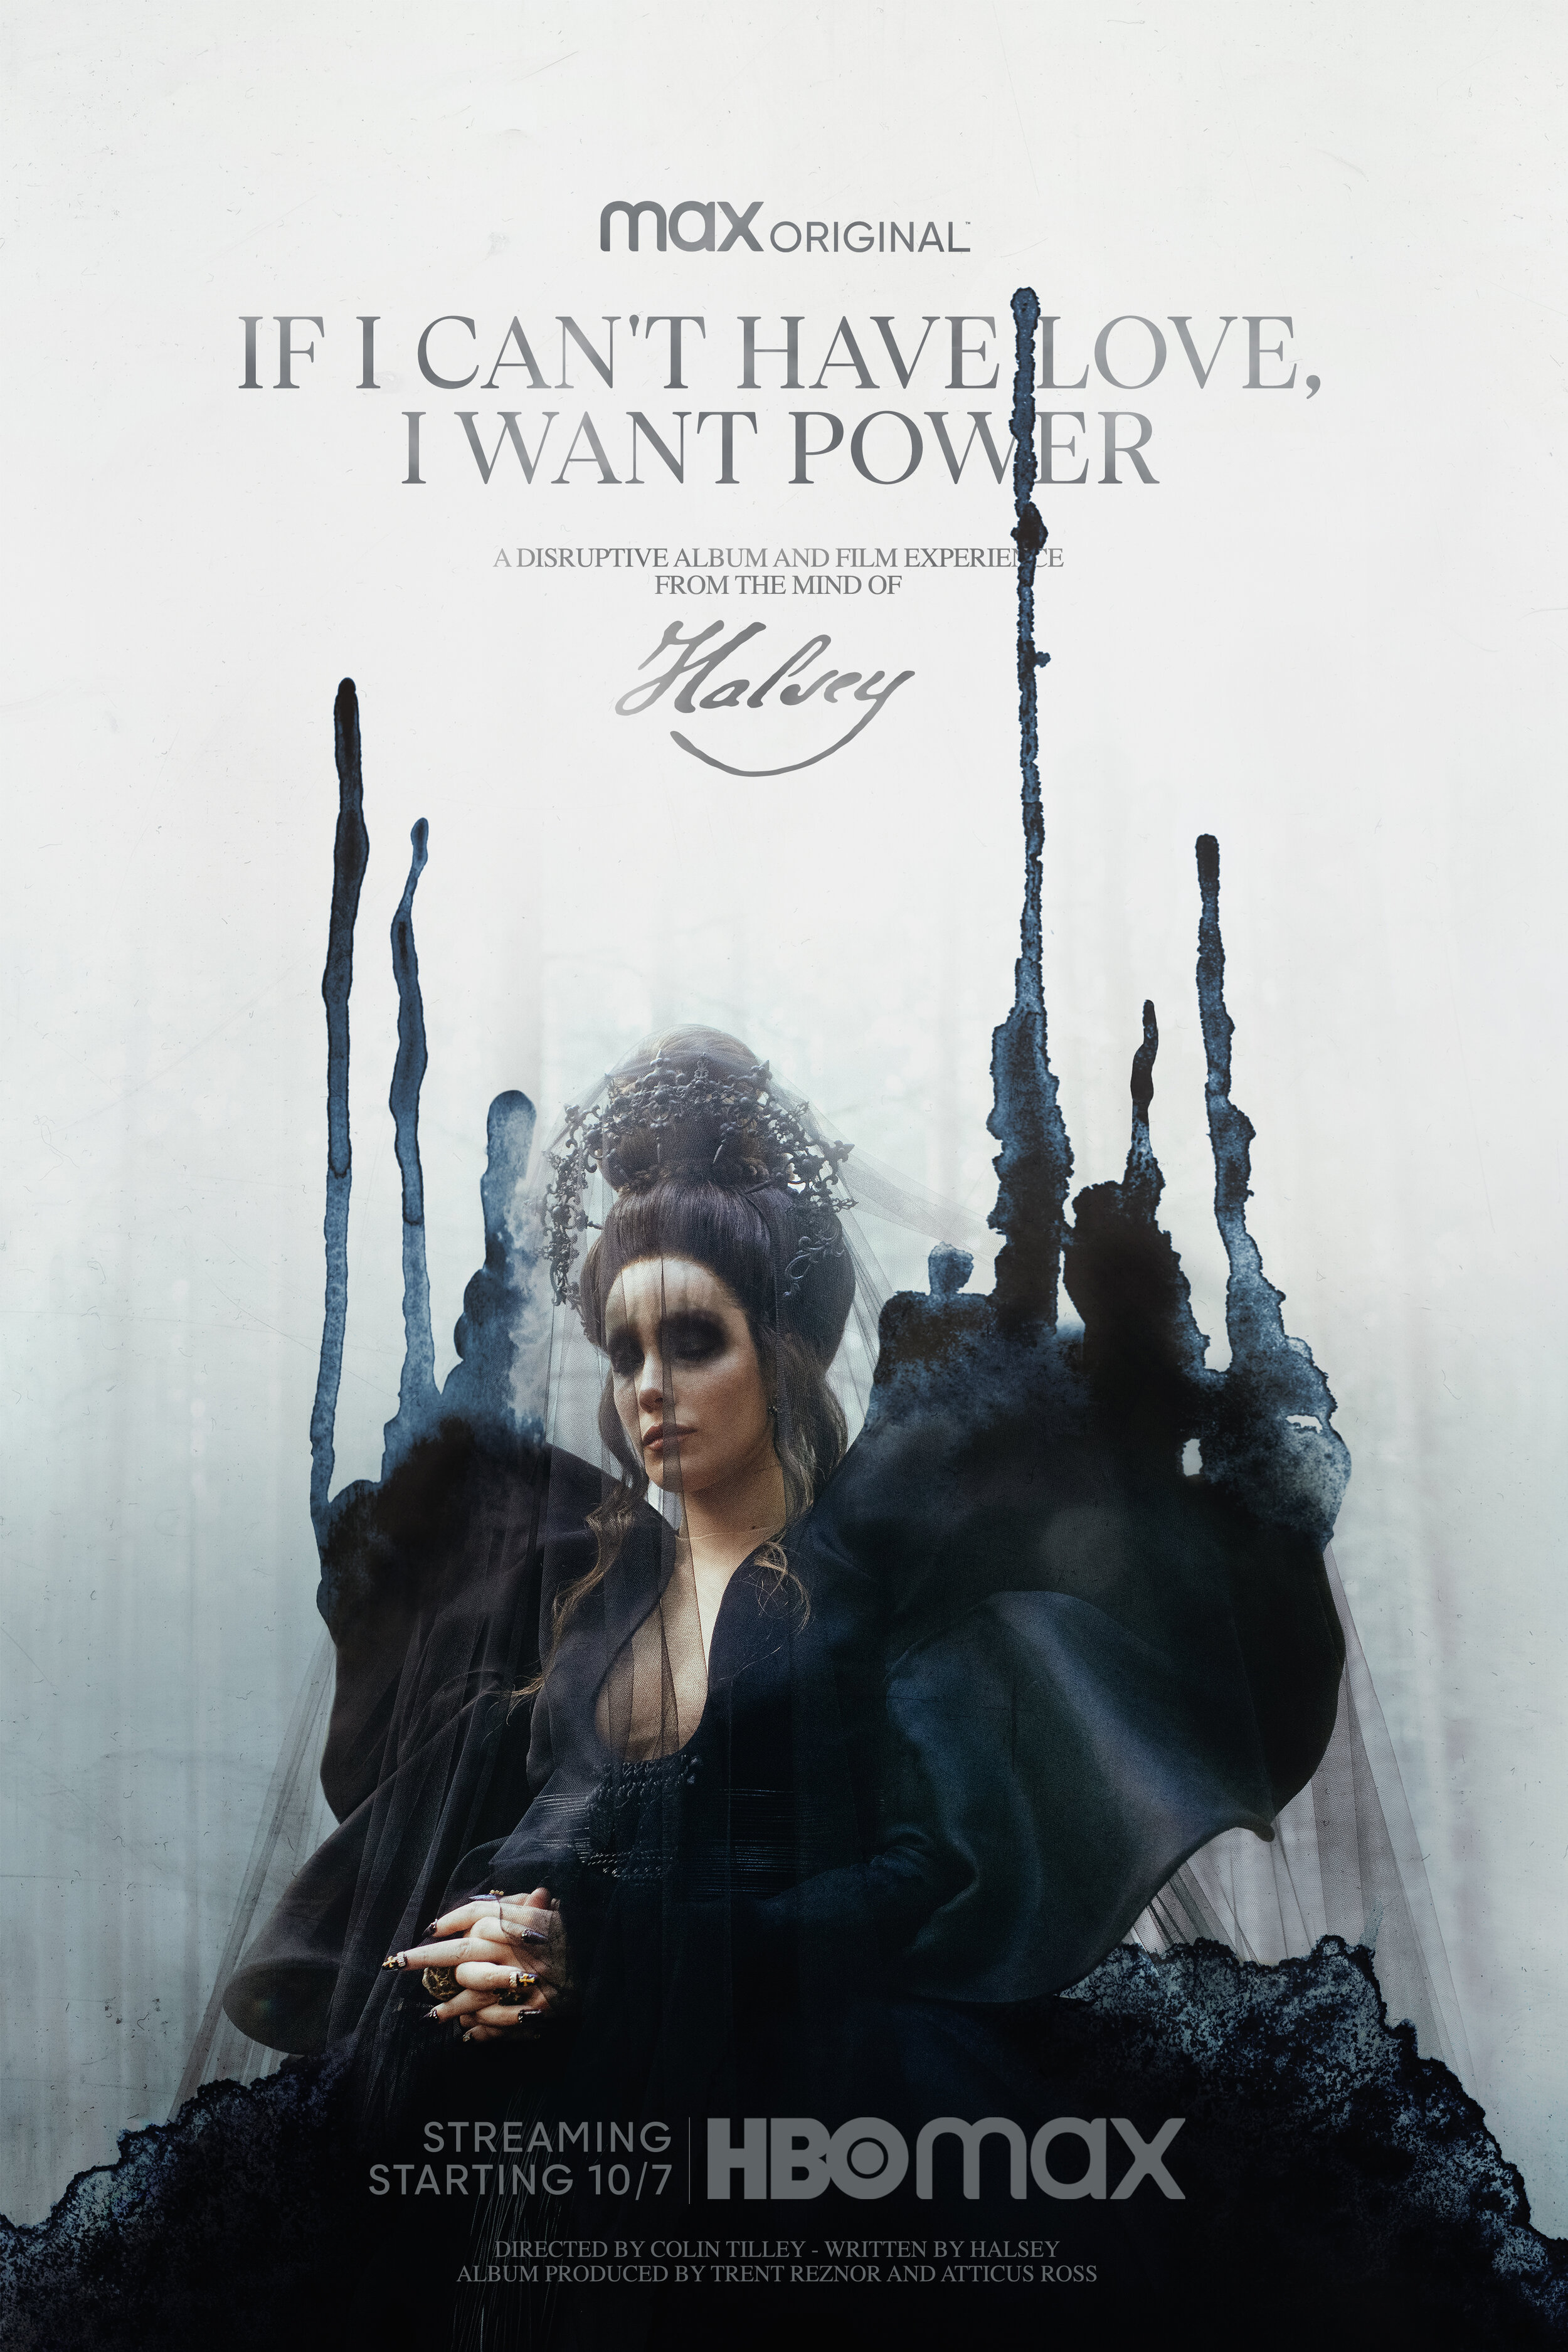  Official HBO Max Release Poster for Halsey’s “If I Can’t Have Love, I Want Power”  Design + Direction with Collin Fletcher  Photography by Lucas Garrido 